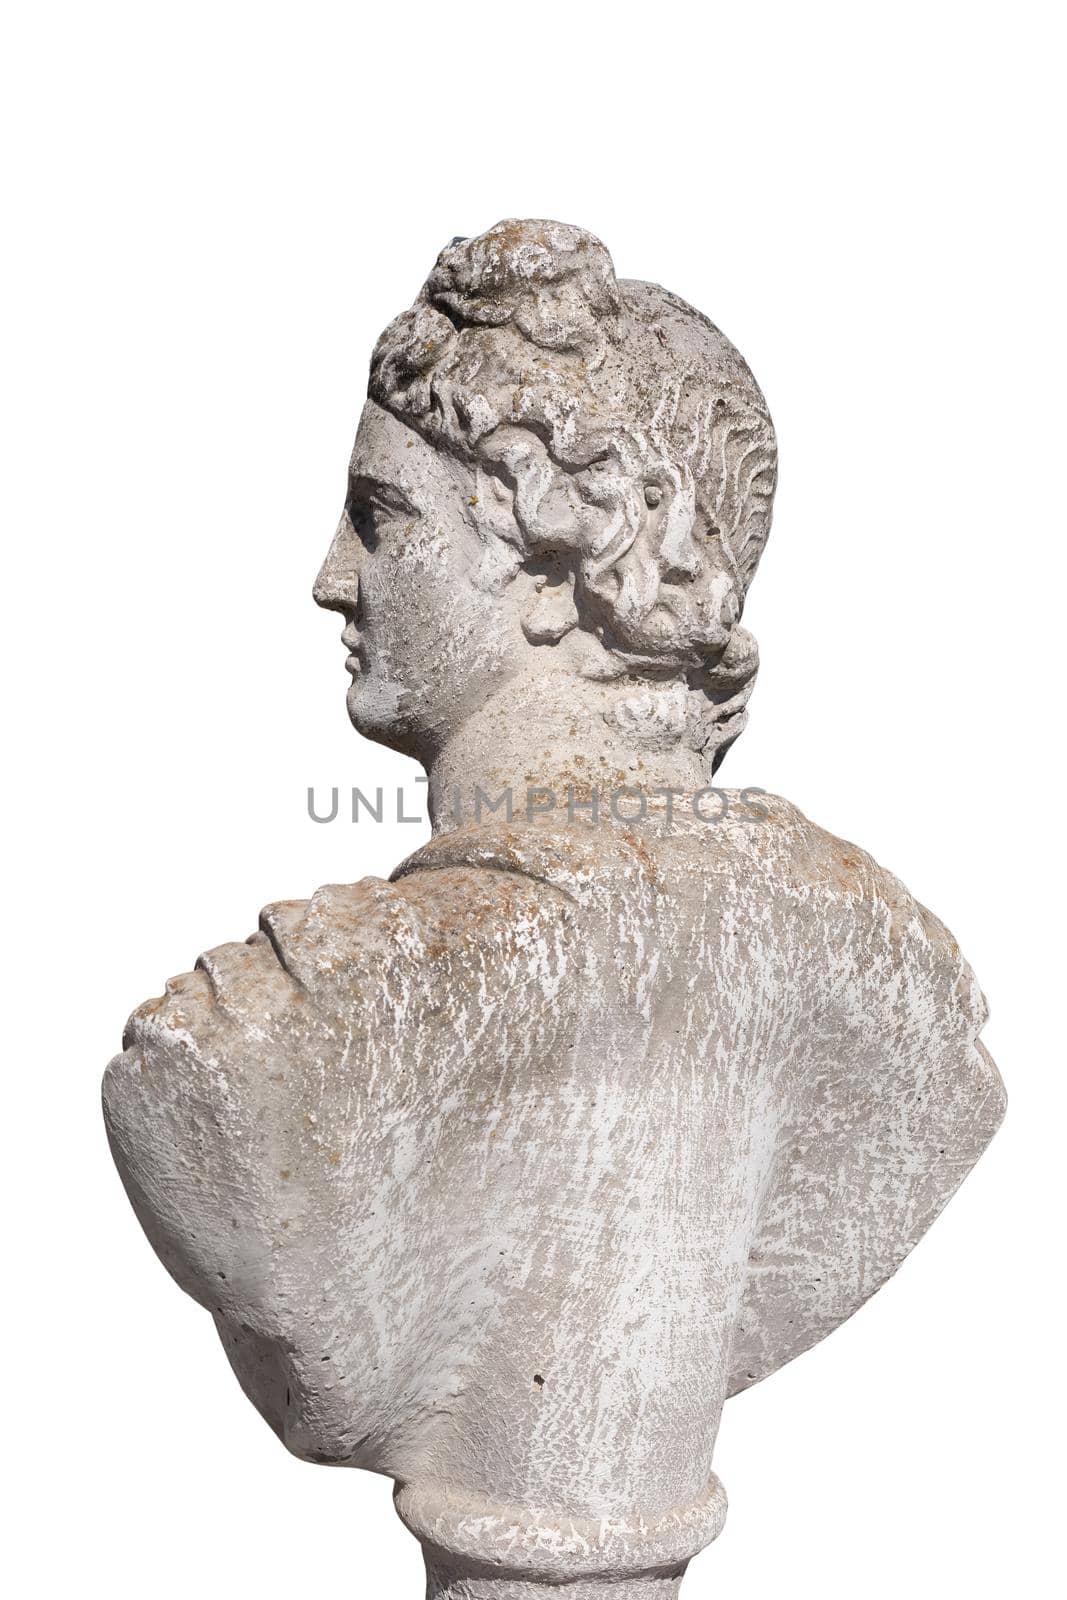 Side view of ancient stone sculpture of man's bust on white background by Wavebreakmedia